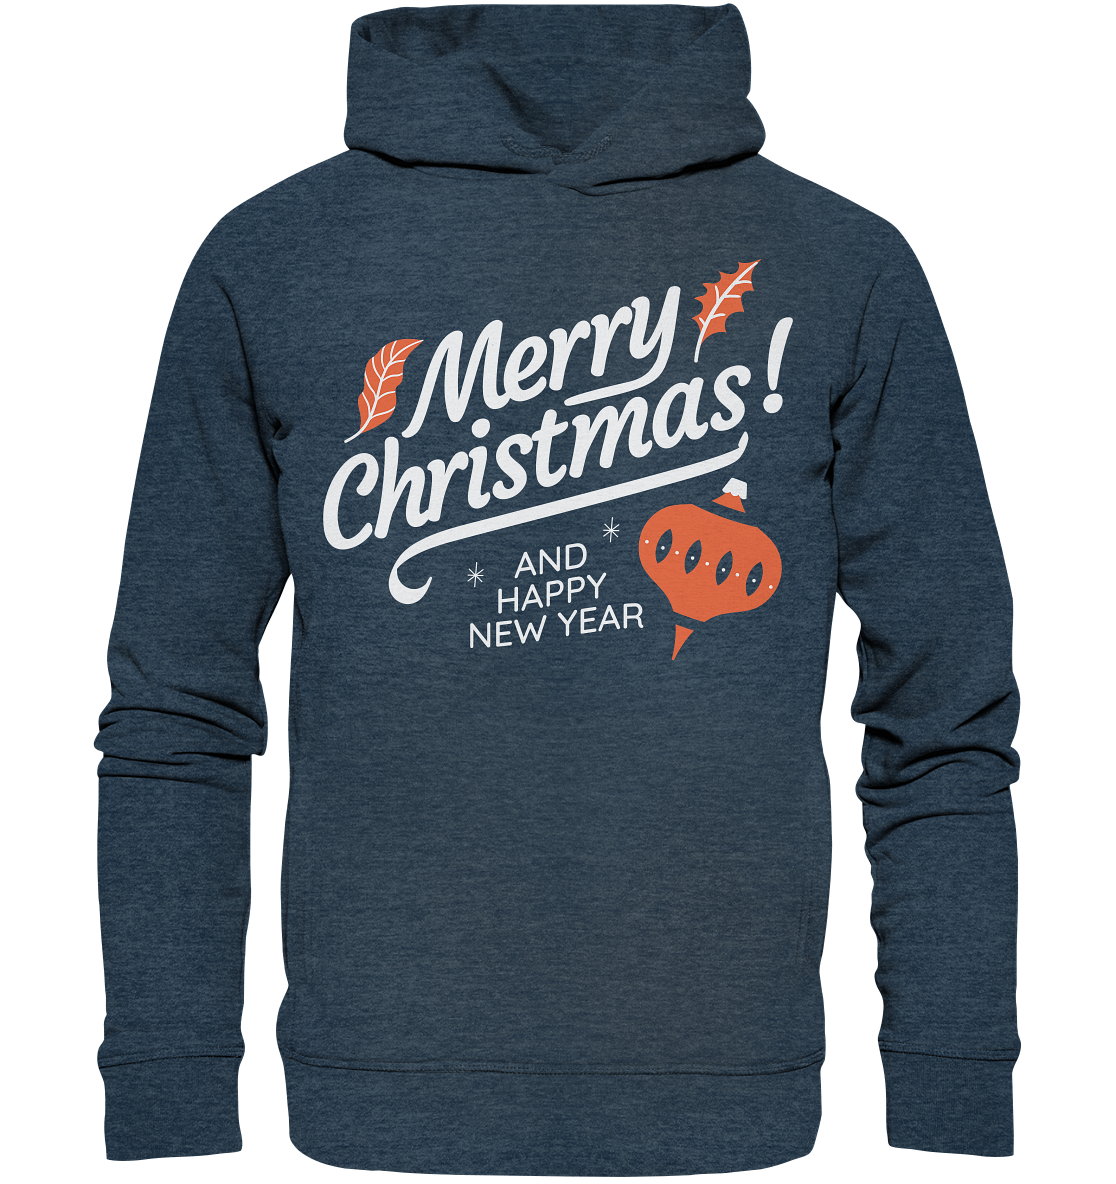 Merry Christmas and Happy New Year ,Merry Christmas and Happy New Year - Organic Fashion Hoodie